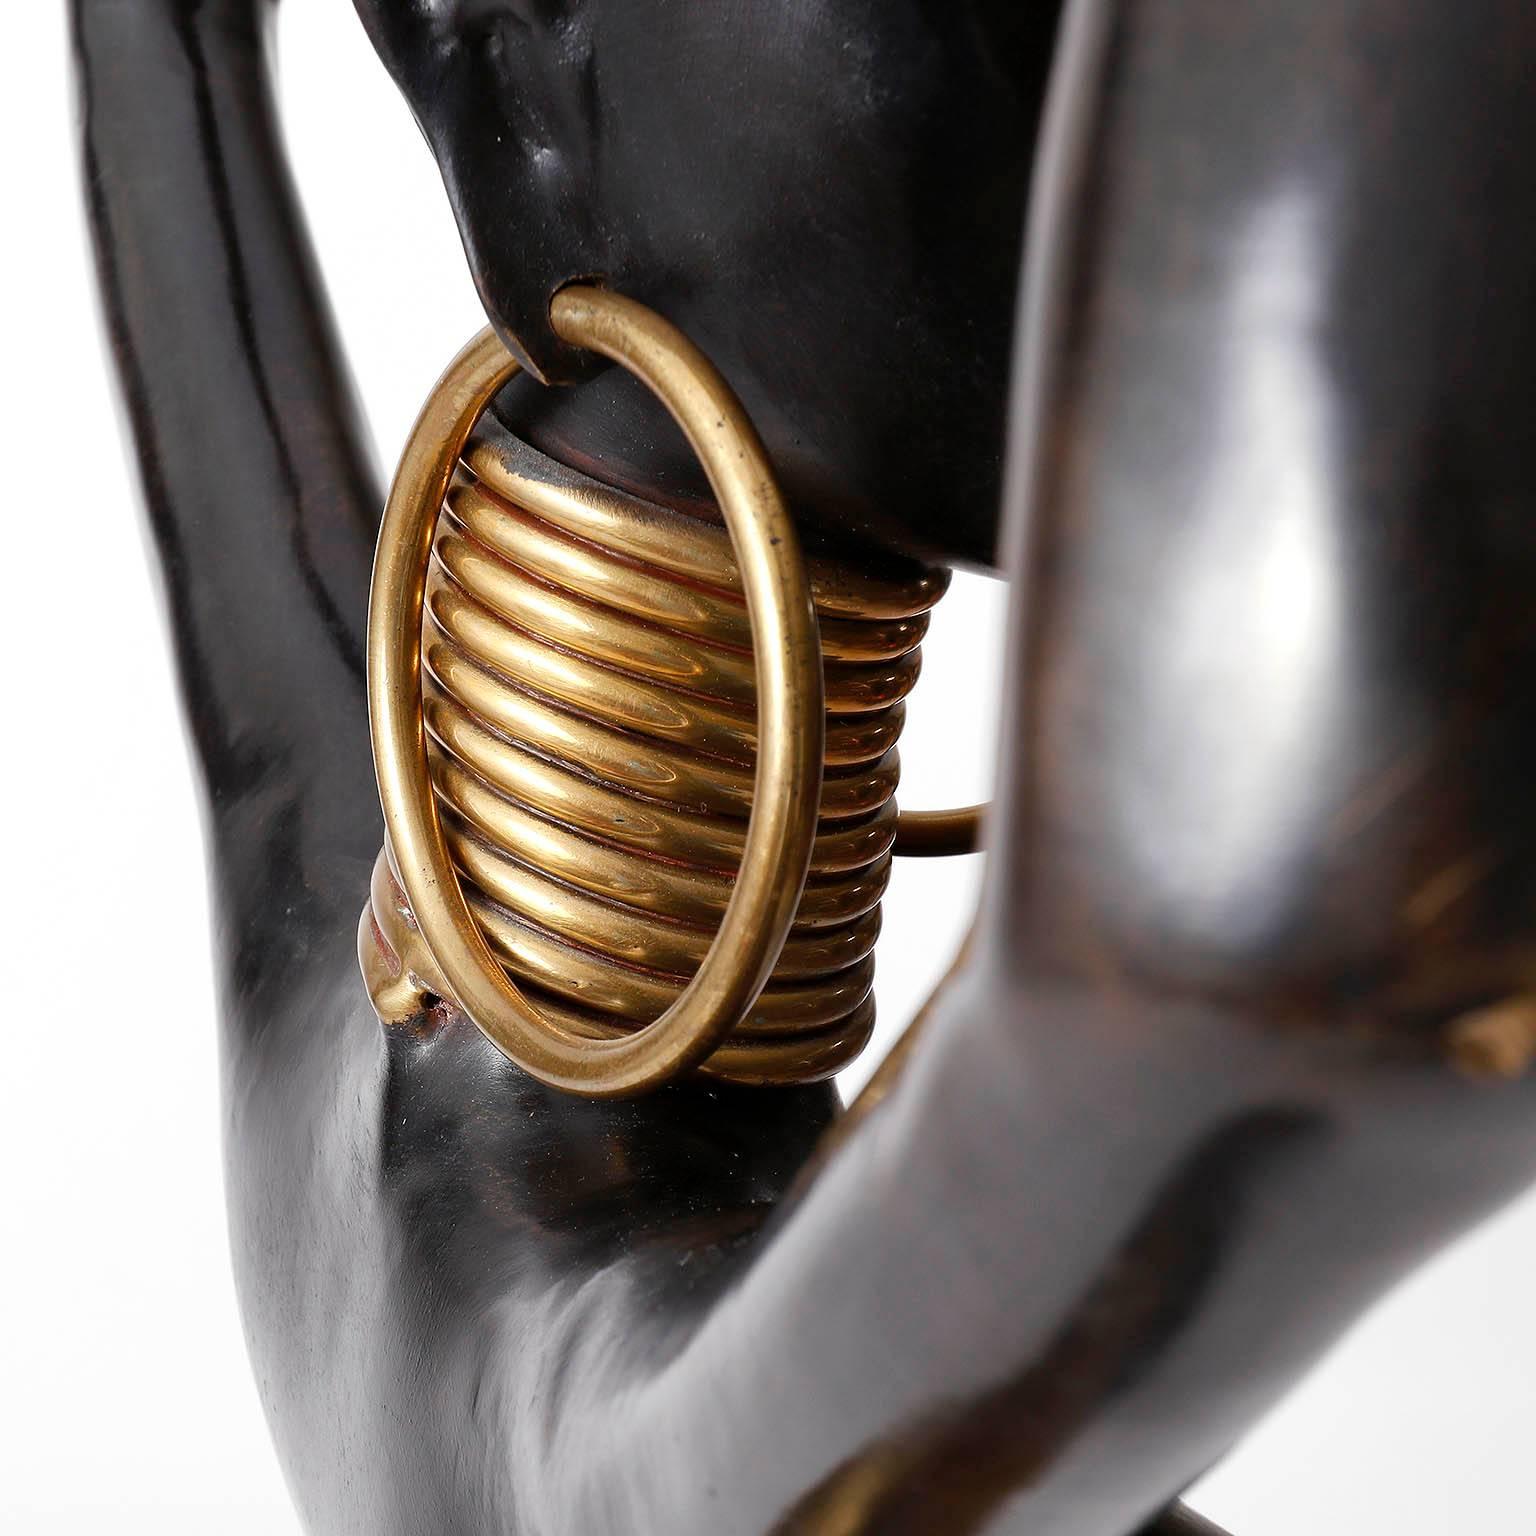 Mid-20th Century Human Size African Woman Sculpture Figurine, Polished and Blackened Brass, 1950